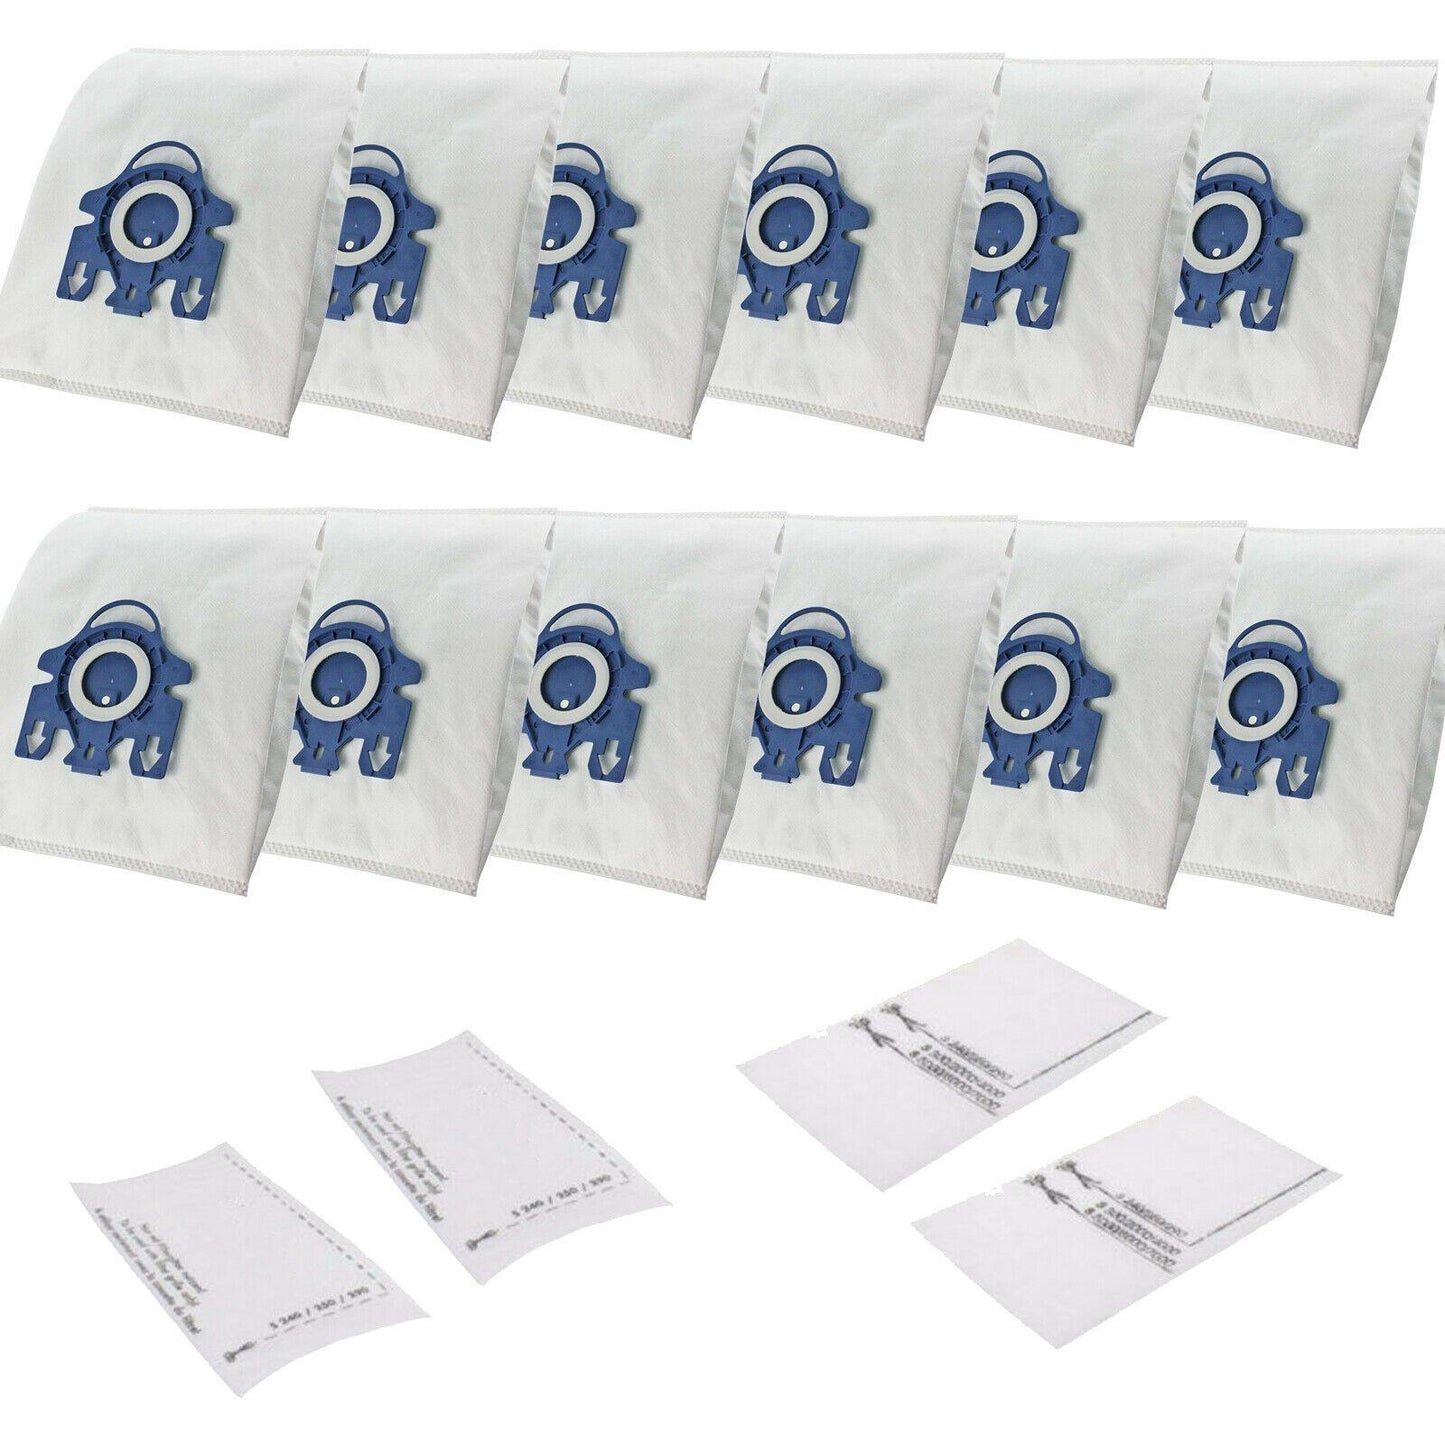 12 Synthetic Vacuum Bag + 8 Filter For Miele GN Blue C1 C2 C3 S5 S8 S5210 AU Sparesbarn